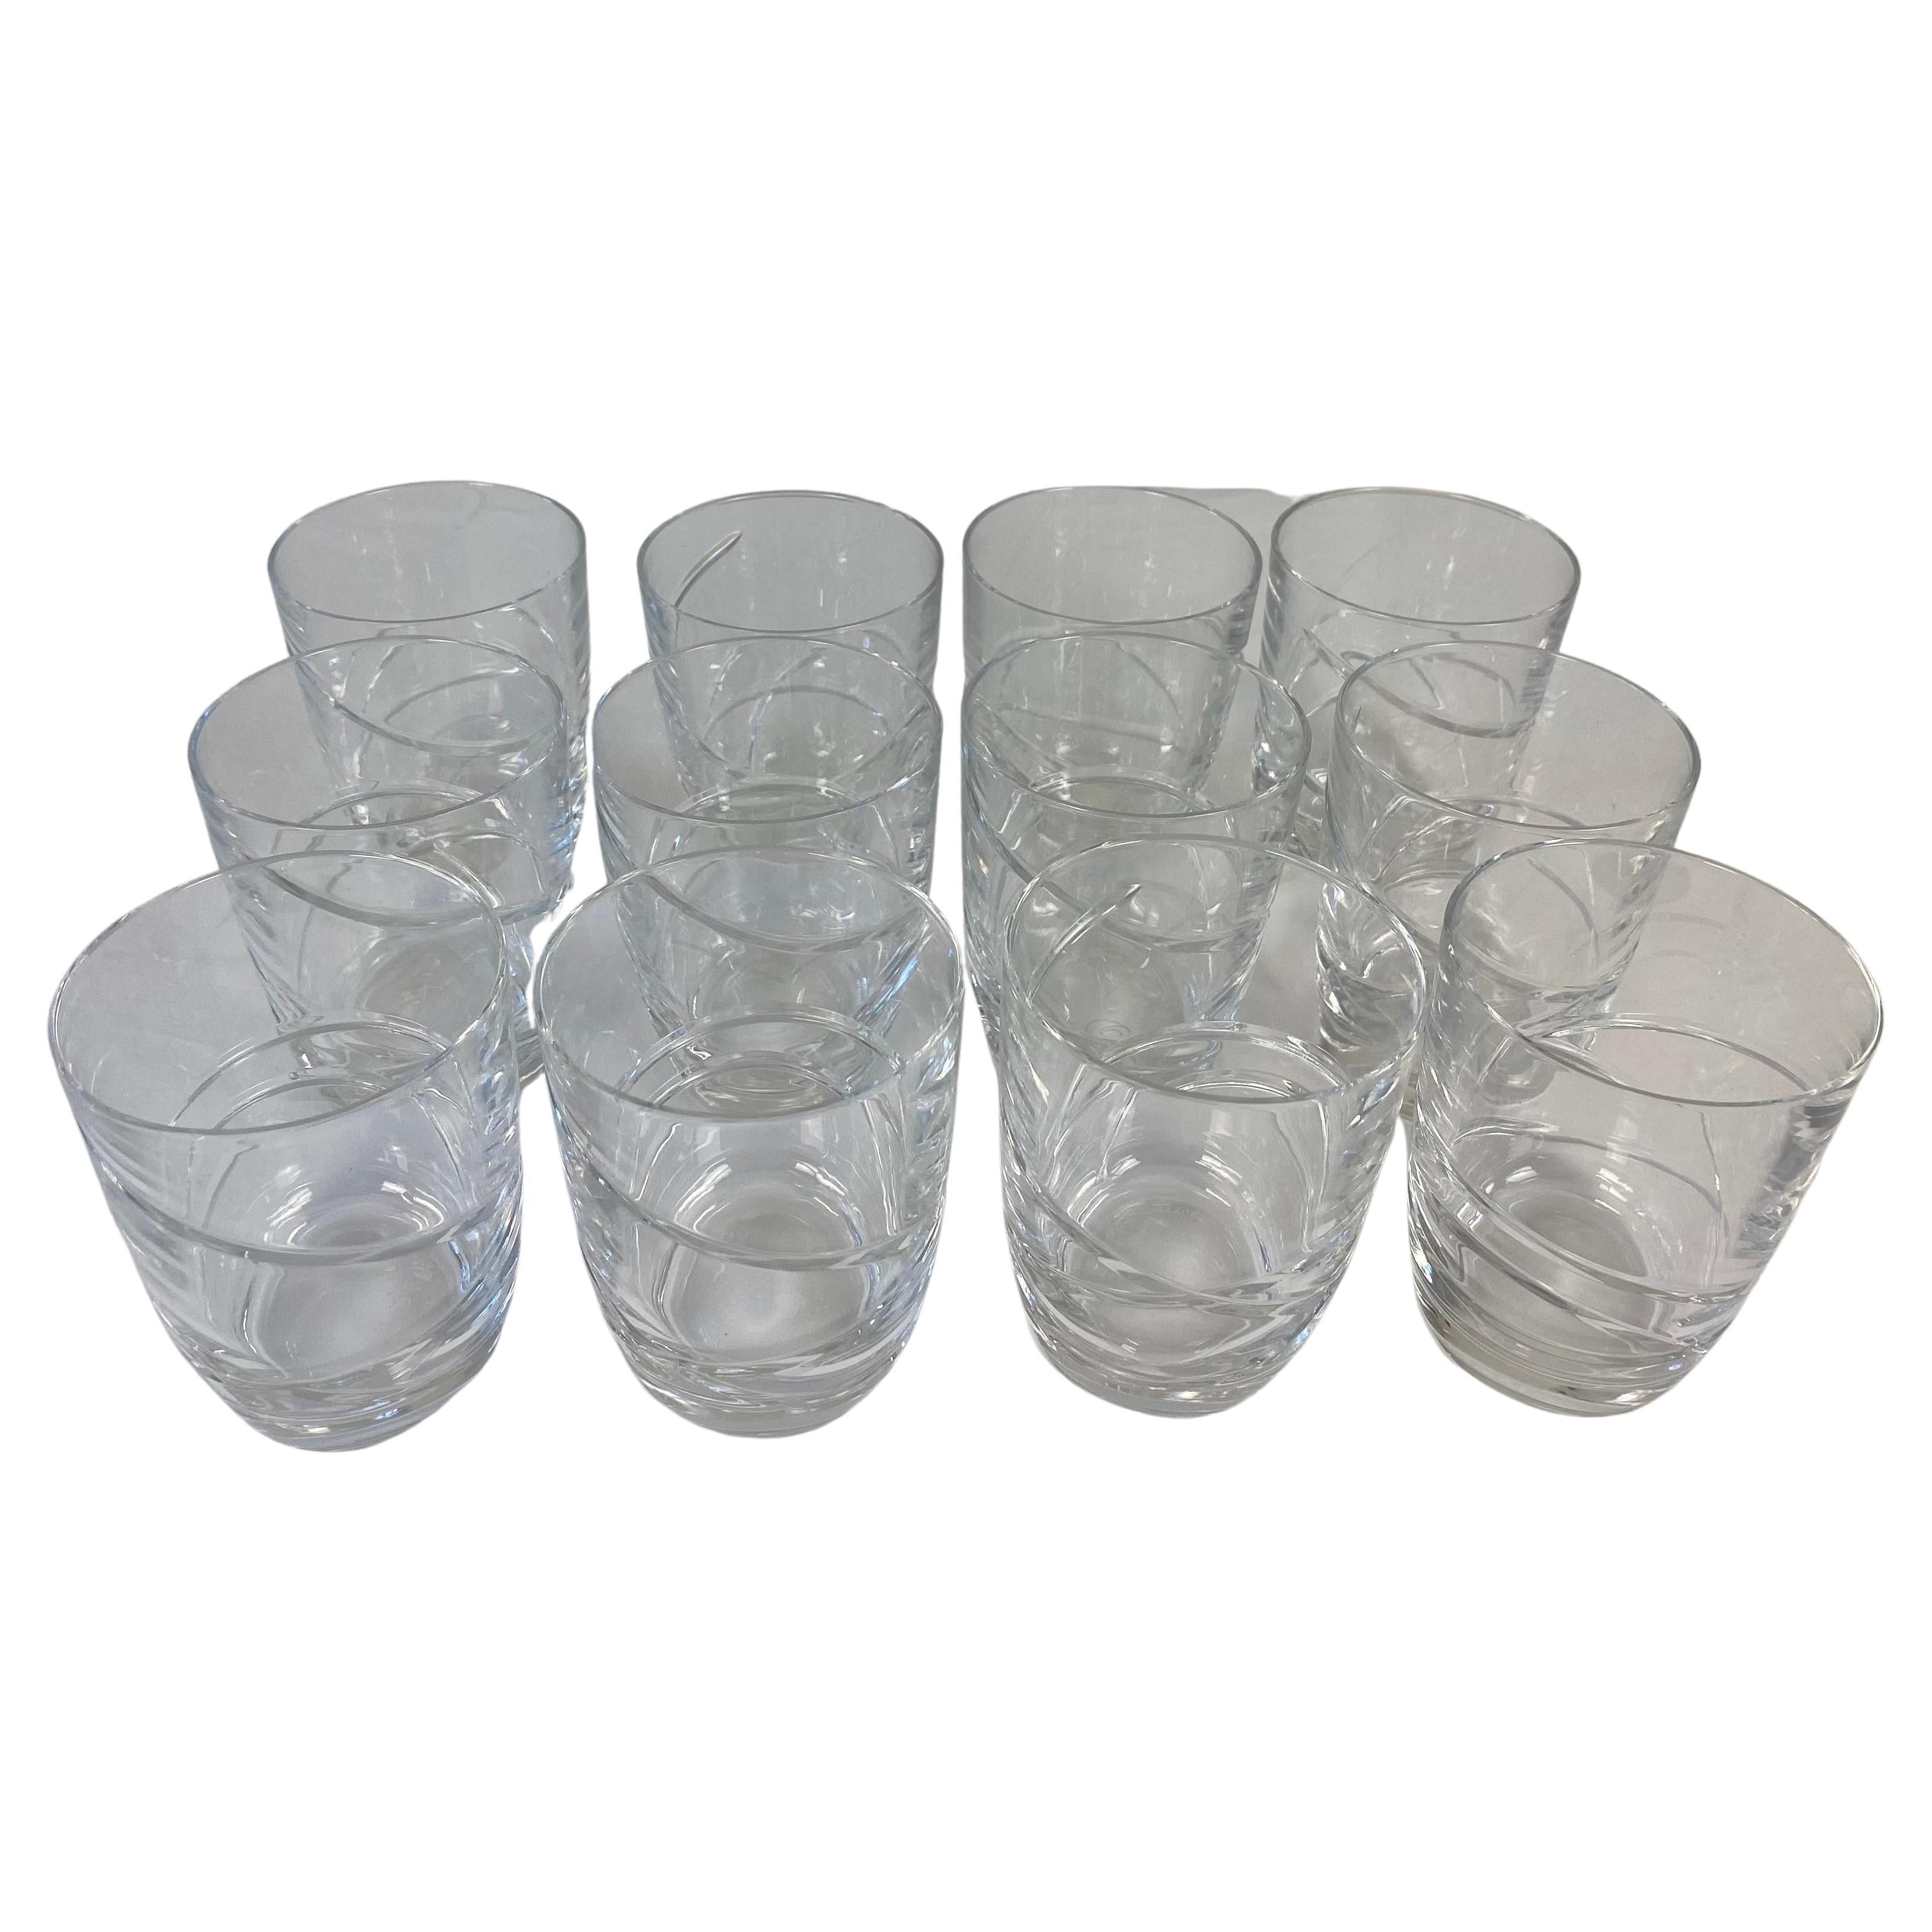 Set of 12 Cut Crystal Liquor Whiskey or Liquor Glasses by Lenox For Sale